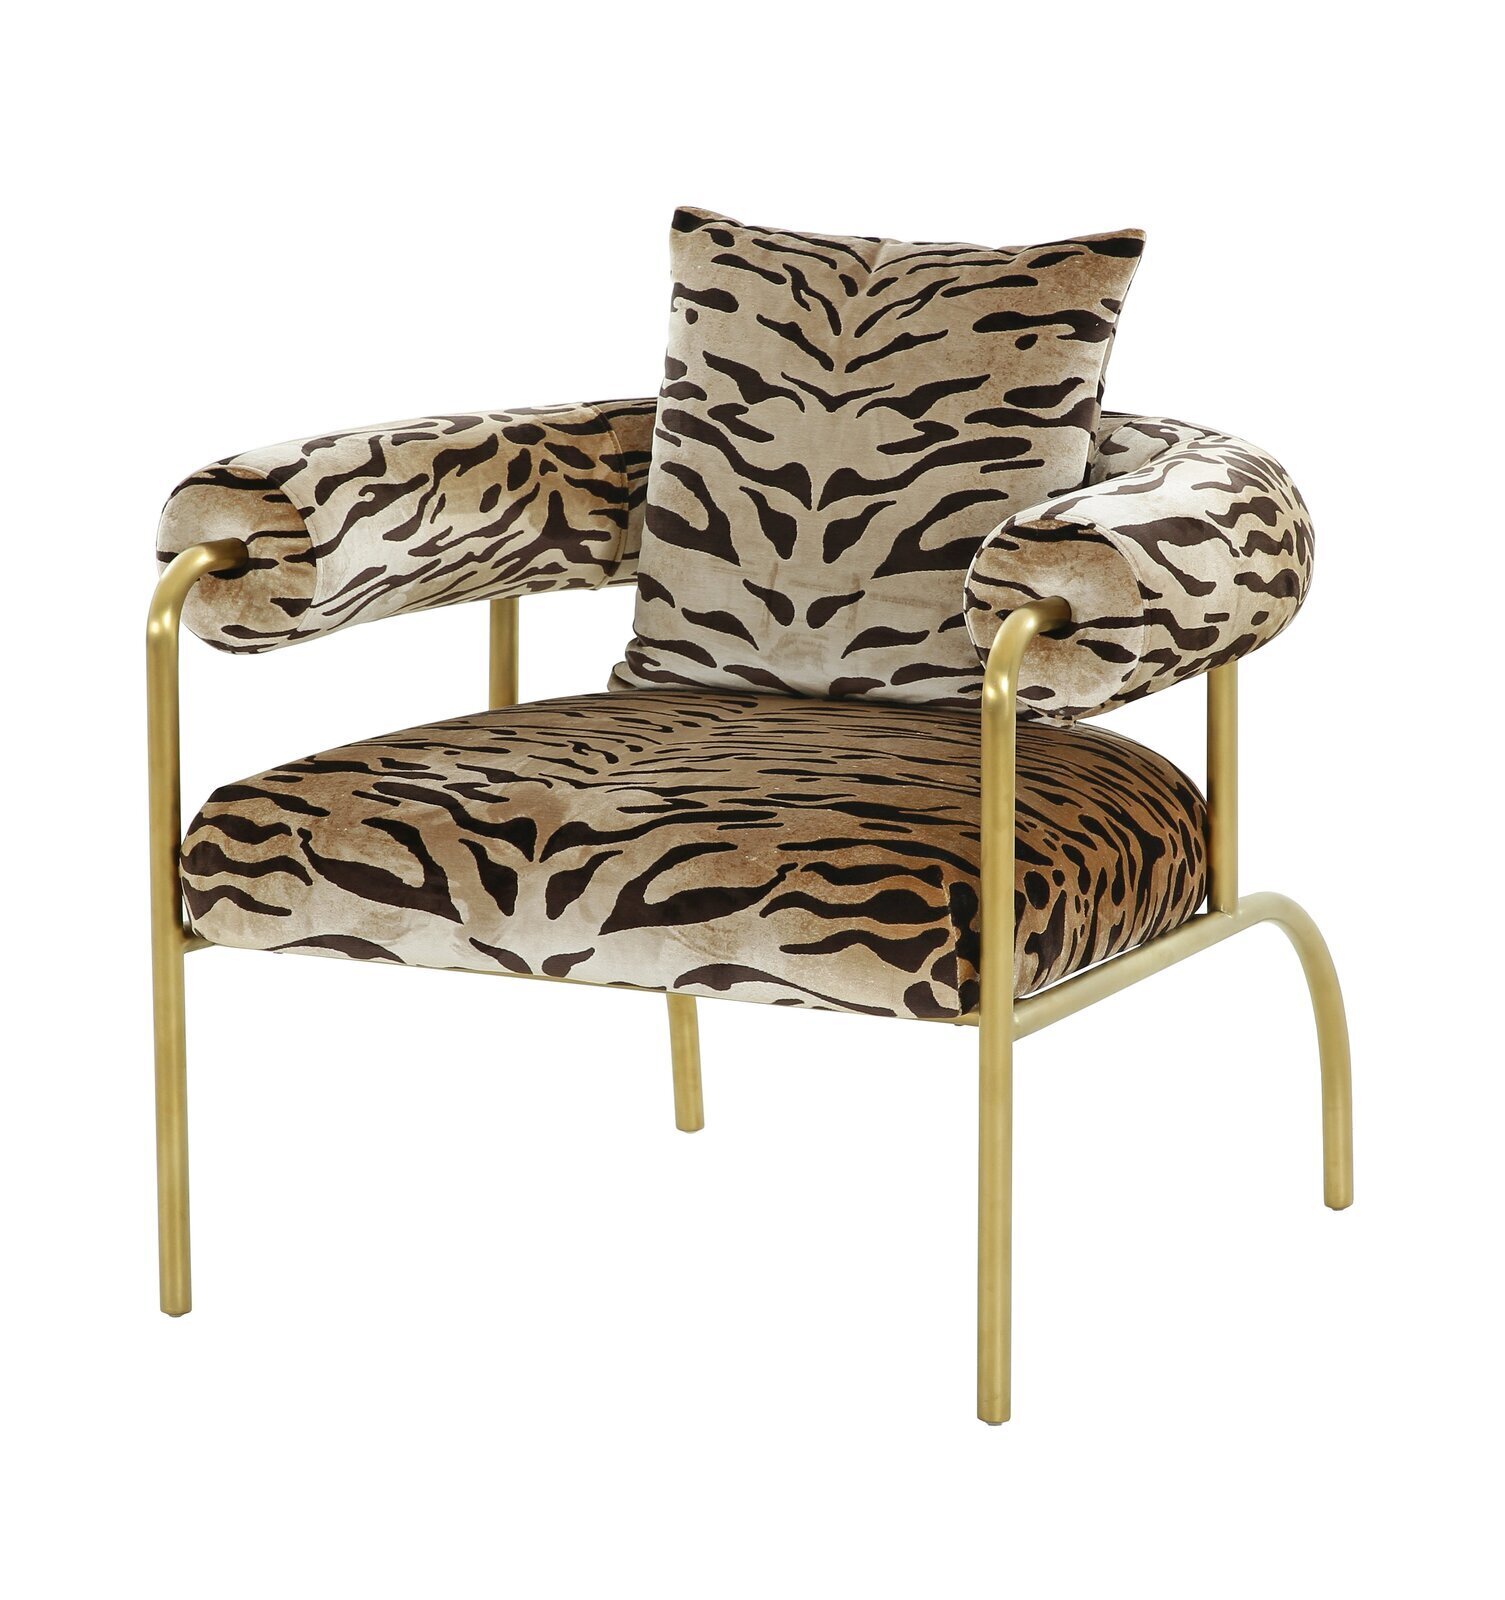 Tiger Print Accent Chair